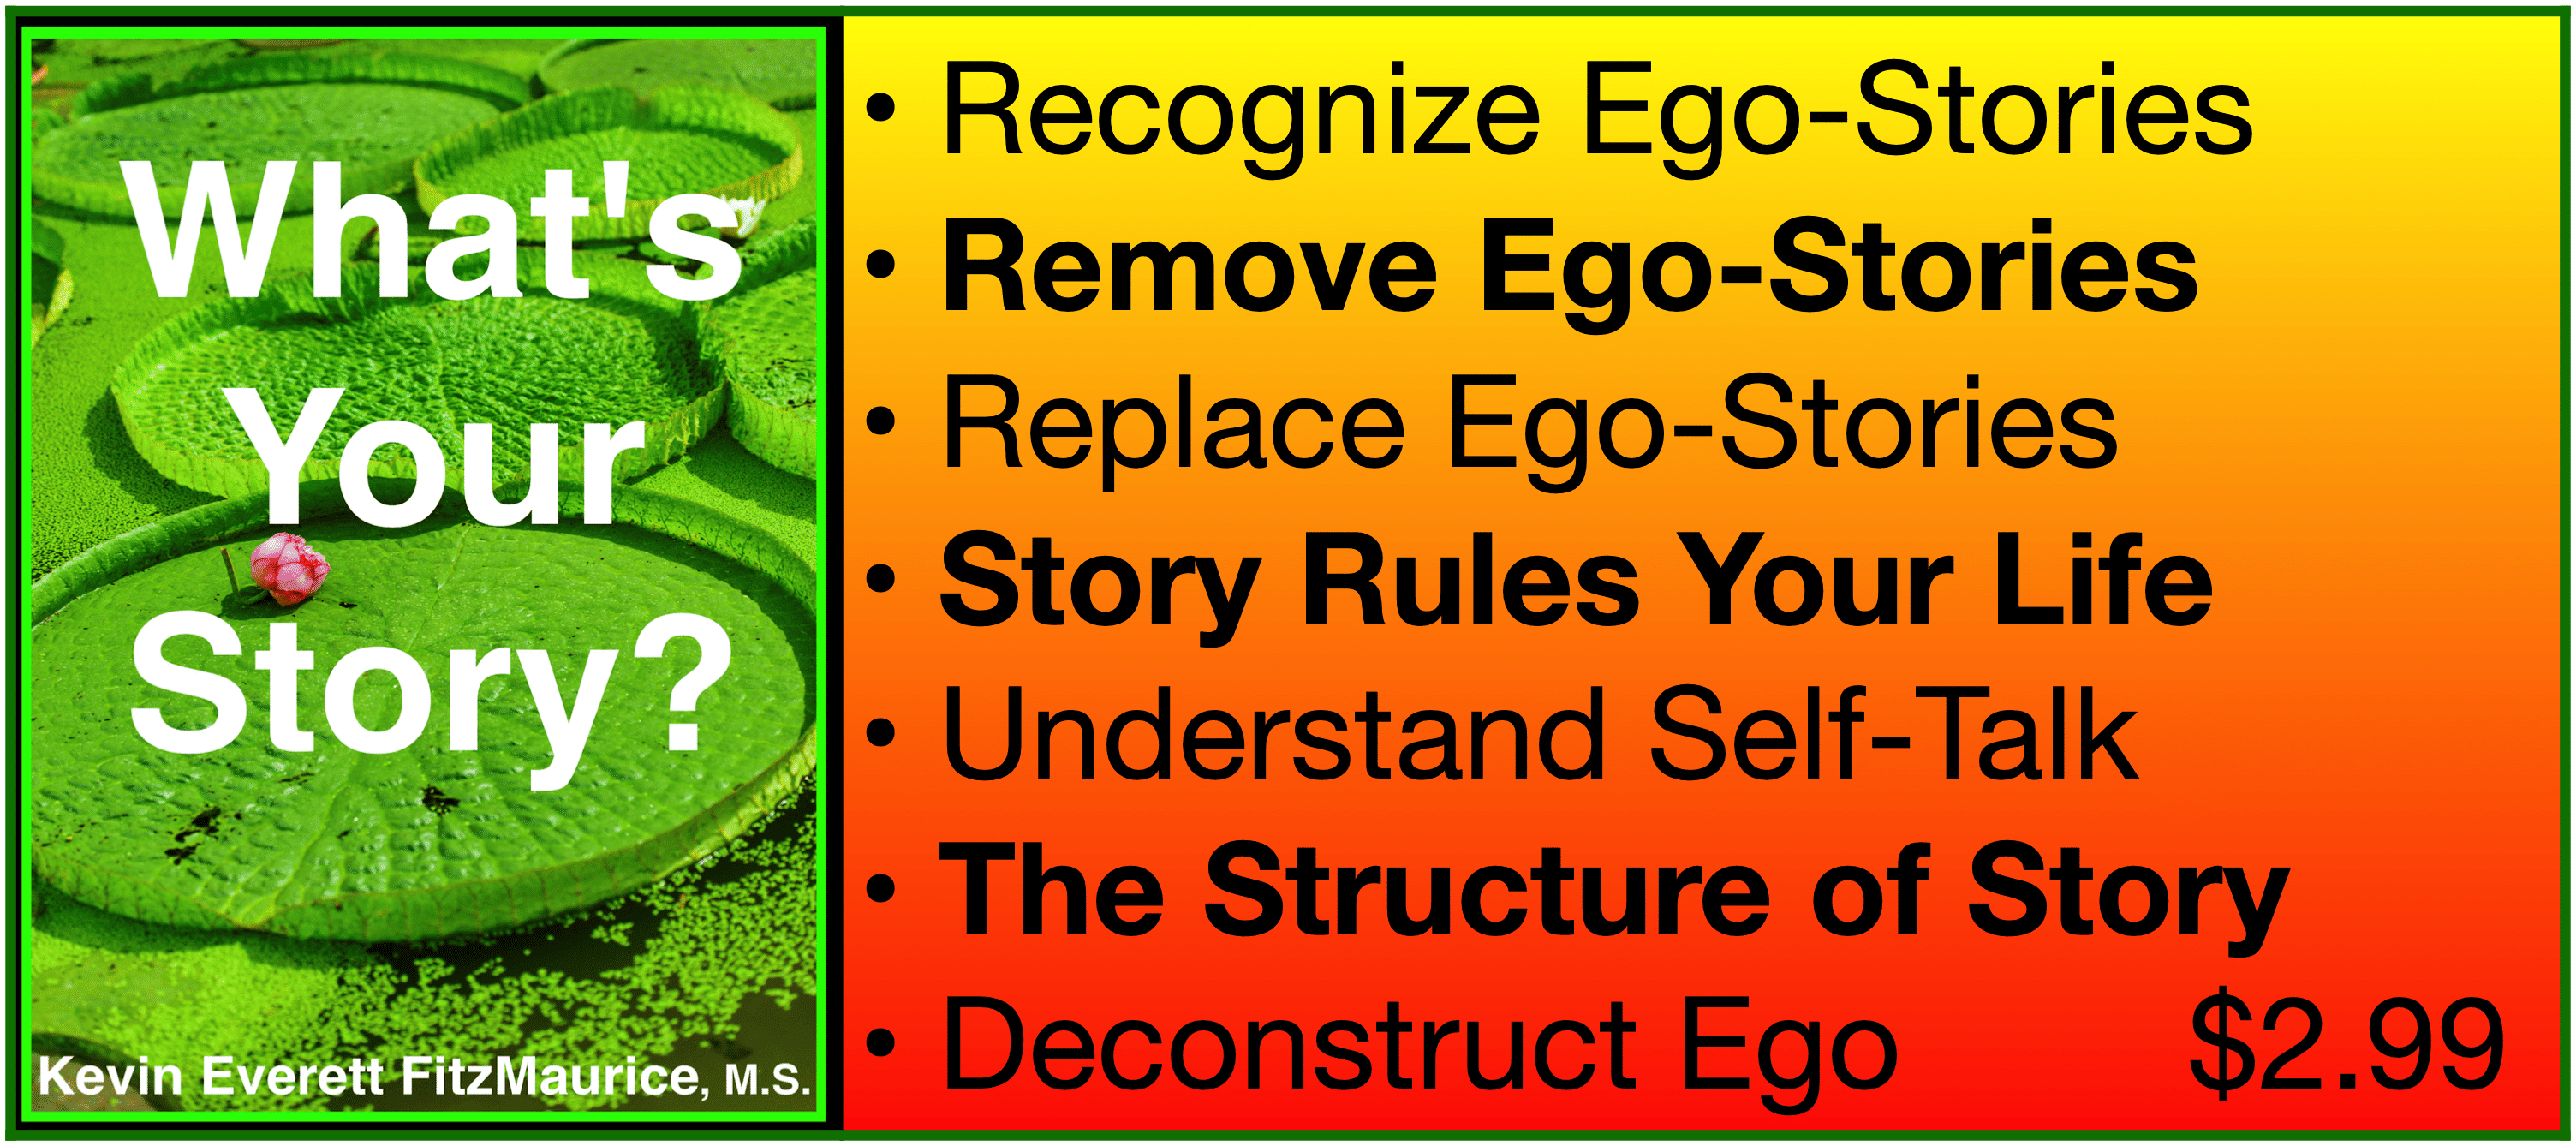 What's Your Story? reasons to read to remove ego